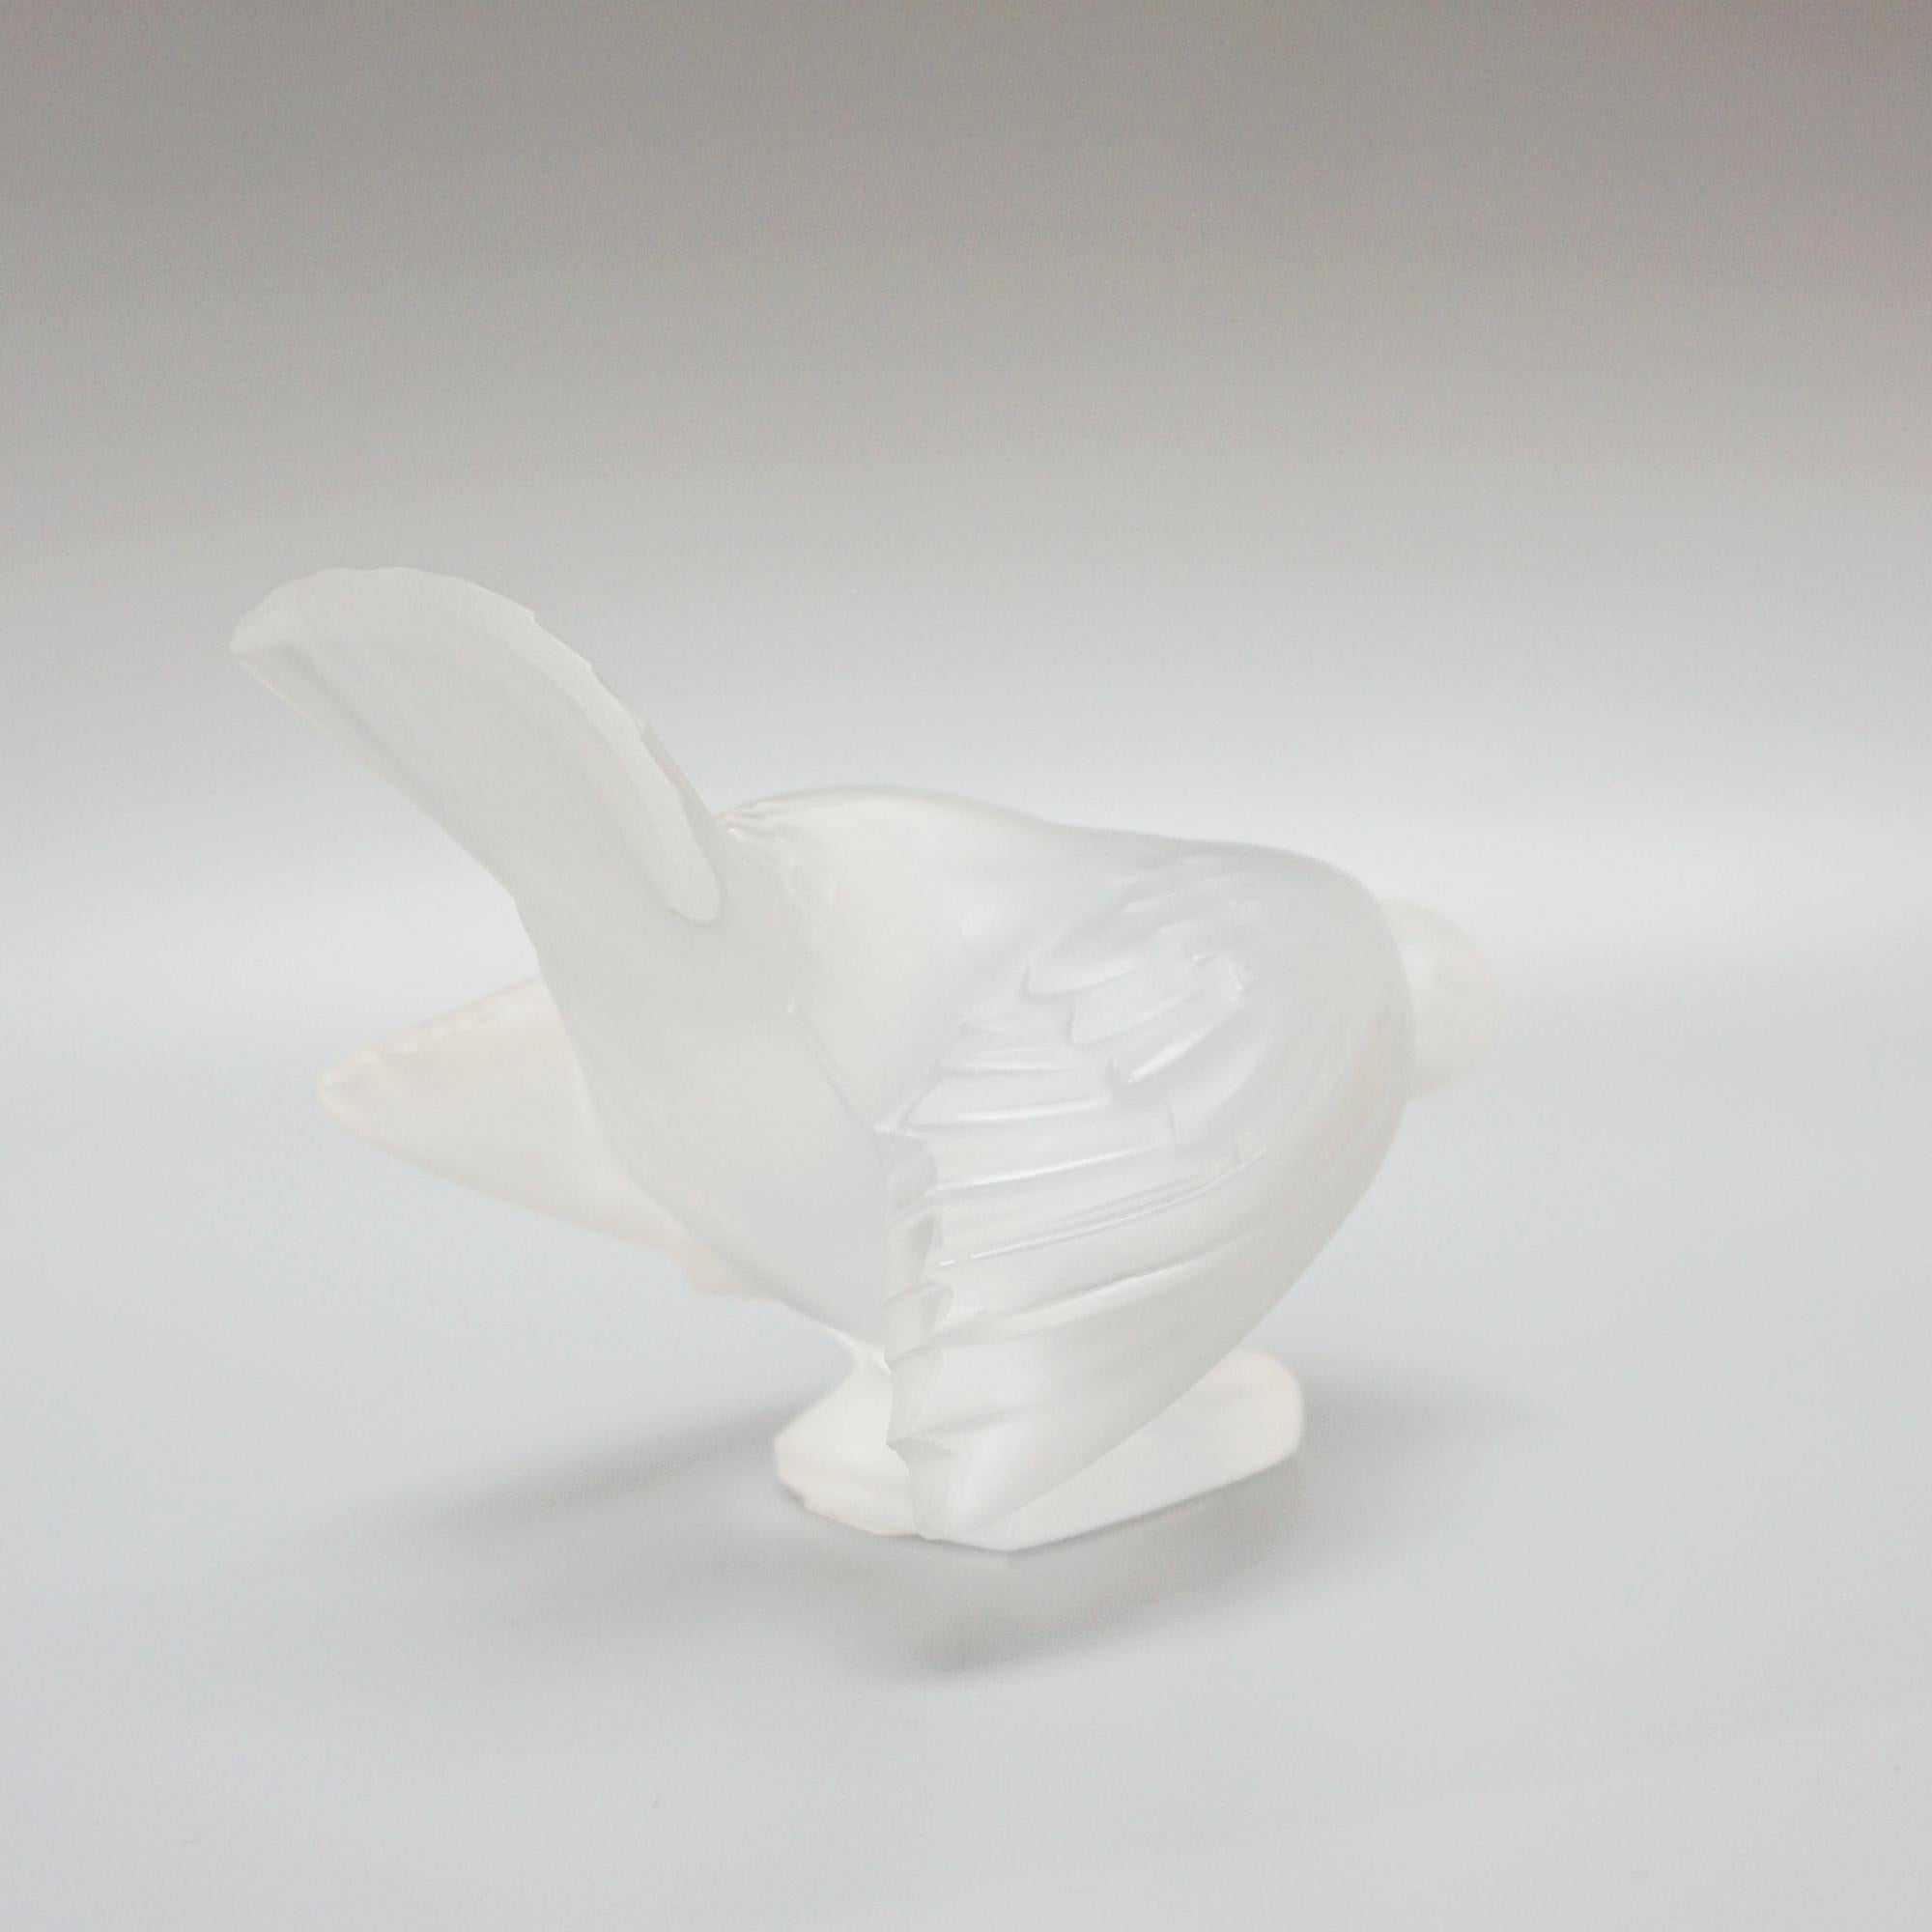 'Moineau Coquet' A Glass Bird Paperweight by Marc Lalique (1900 - 1977) In Good Condition For Sale In Forest Row, East Sussex